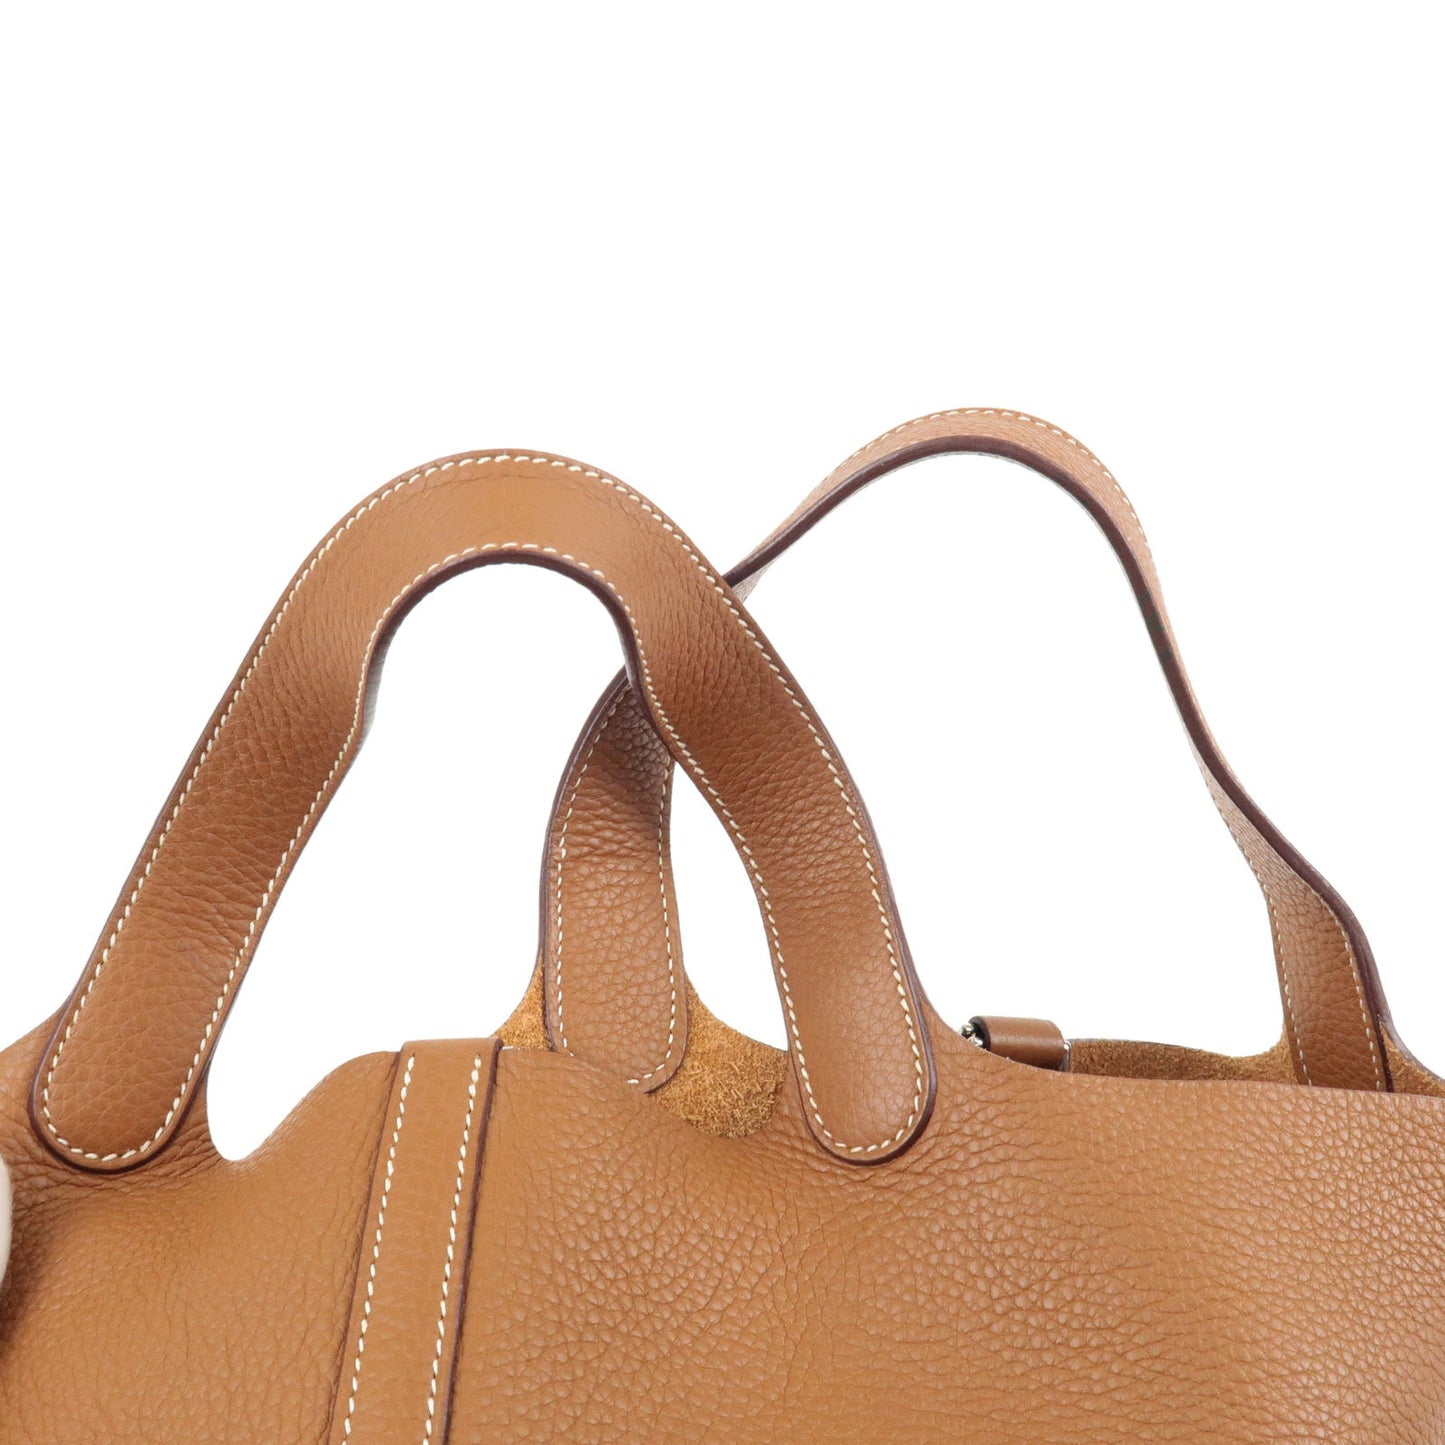 HERMES Taurillon Clemence Picotin PM Hand Bag K Stamped Gold